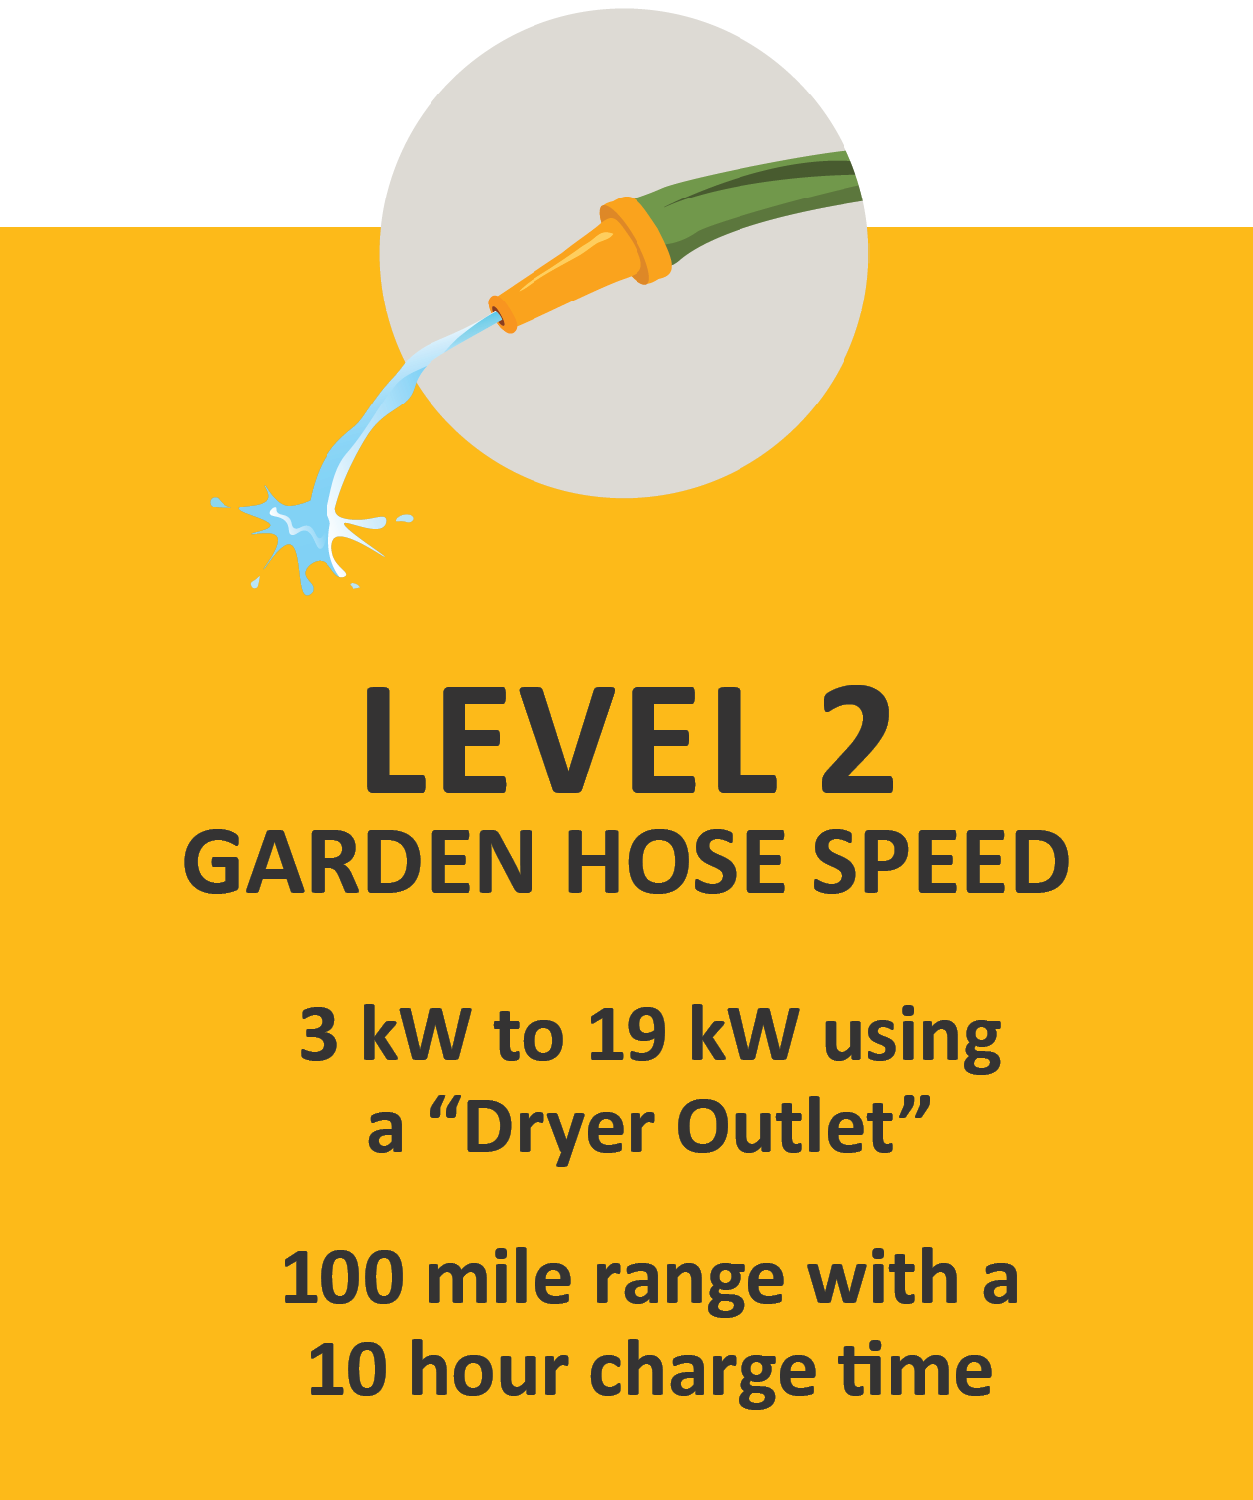 Level 2: Garden Hose Speed. 3 kW to 19 kW using a “Dryer Outlet” 100 miles range with a 10 hour charge time.